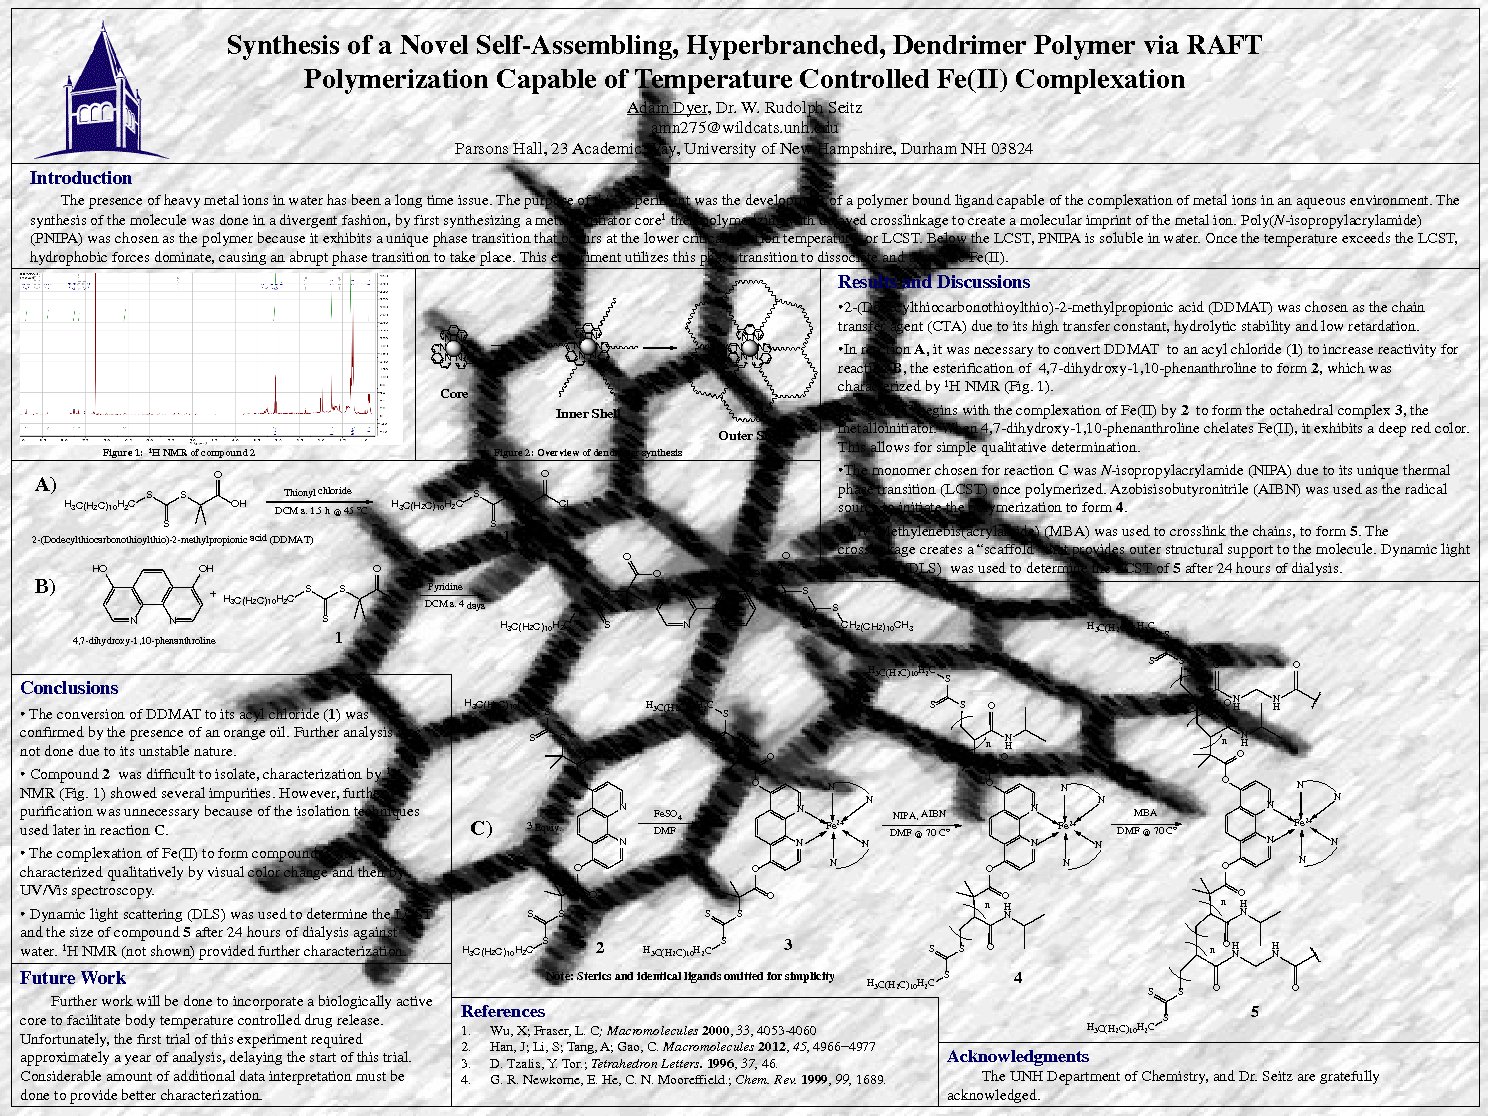 Synthesis Of A Novel Self-Assembling, Hyperbranched, Dendrimer Polymer Via Raft Polymerization Capable Of Temperature Controlled Fe(Ii) Complexation by amn275